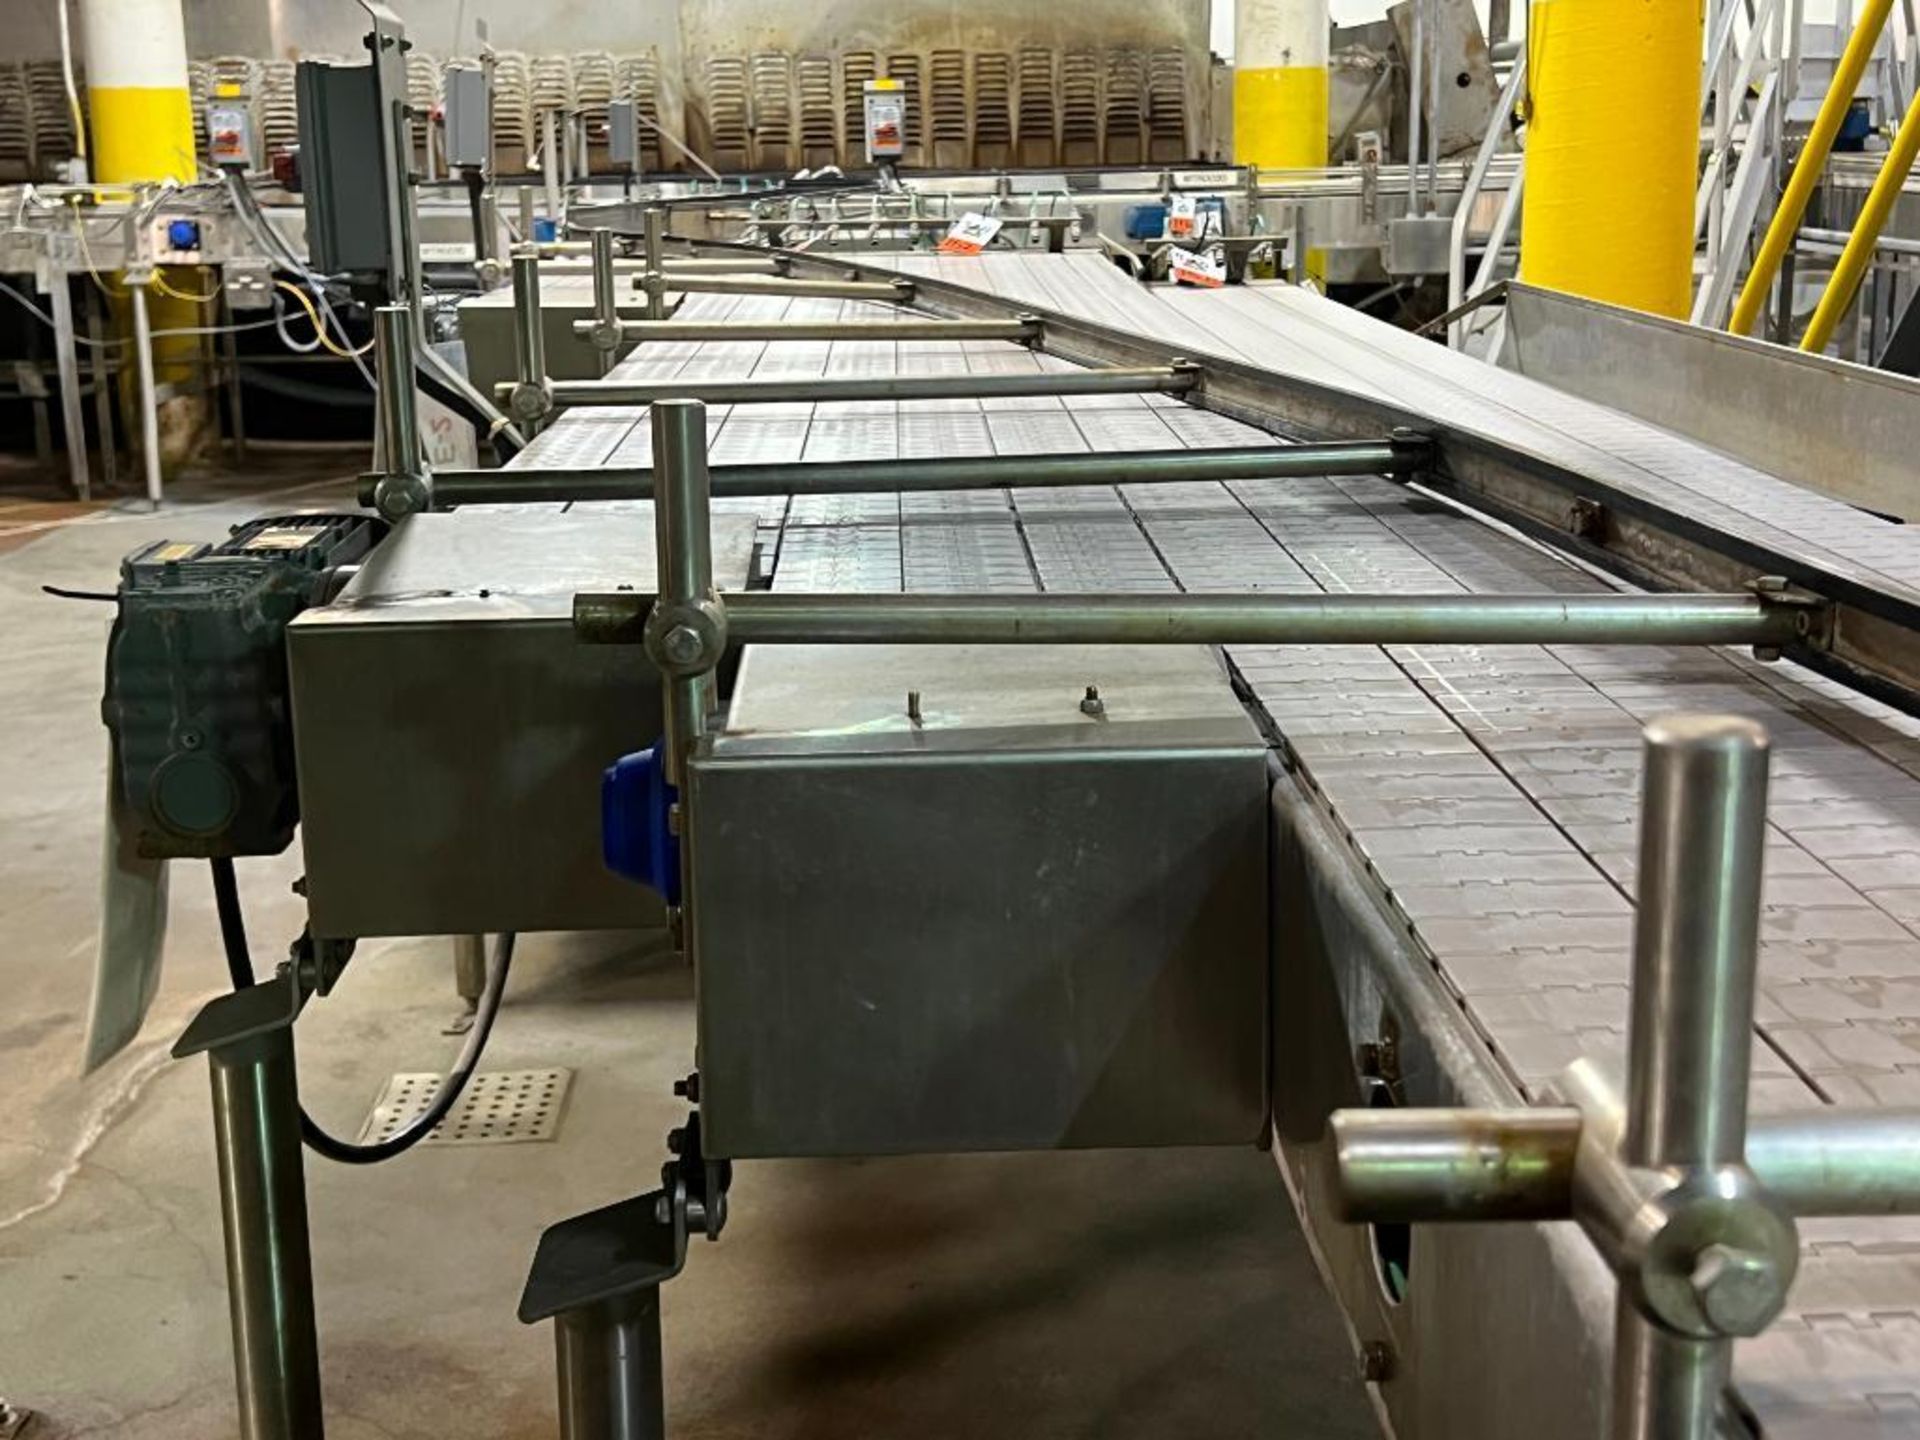 stainless steel step-belt can conveyor - Image 24 of 25